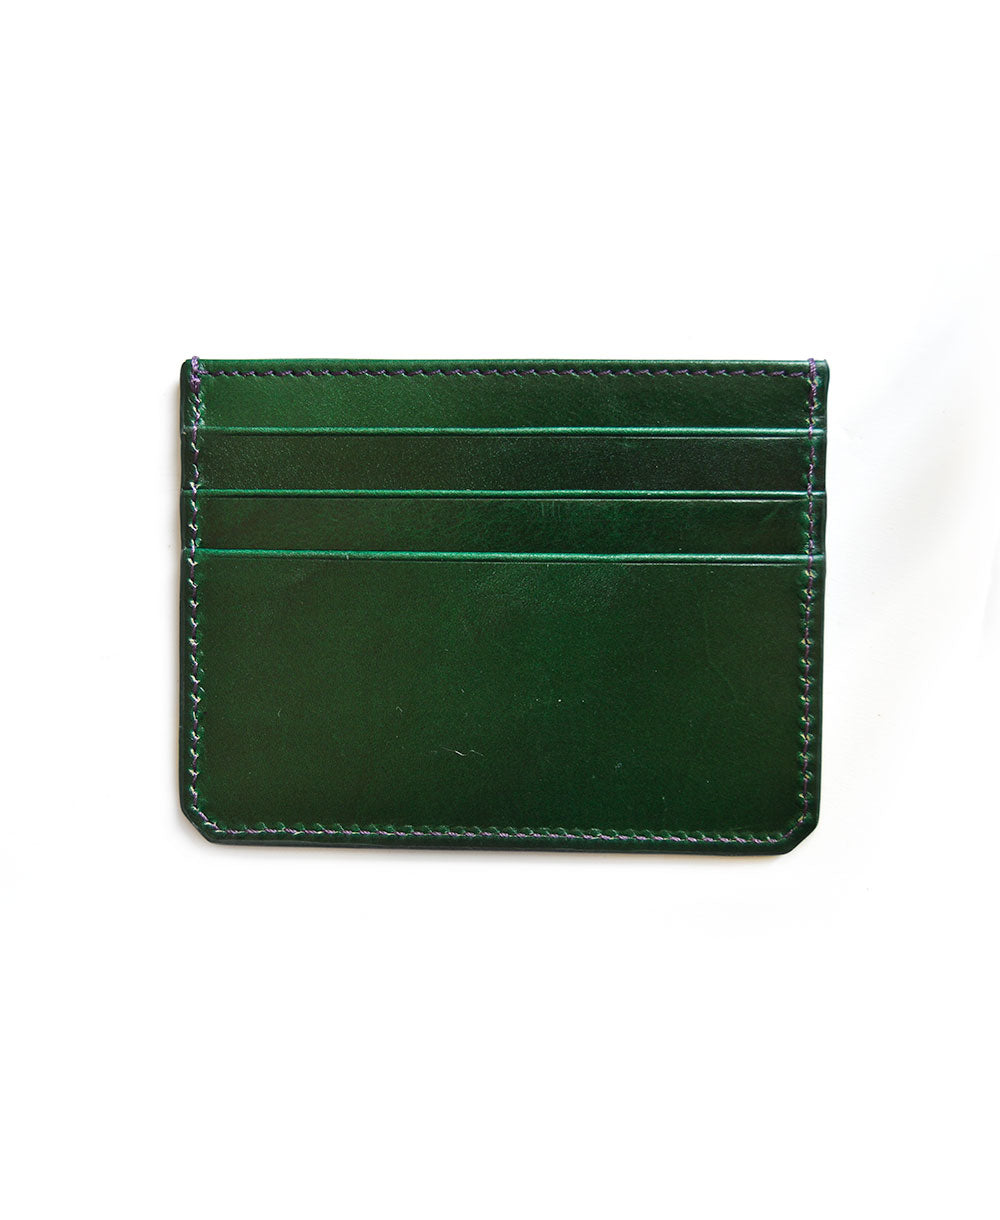 GRRC Leather Card Holder in Green & Purple Reverse